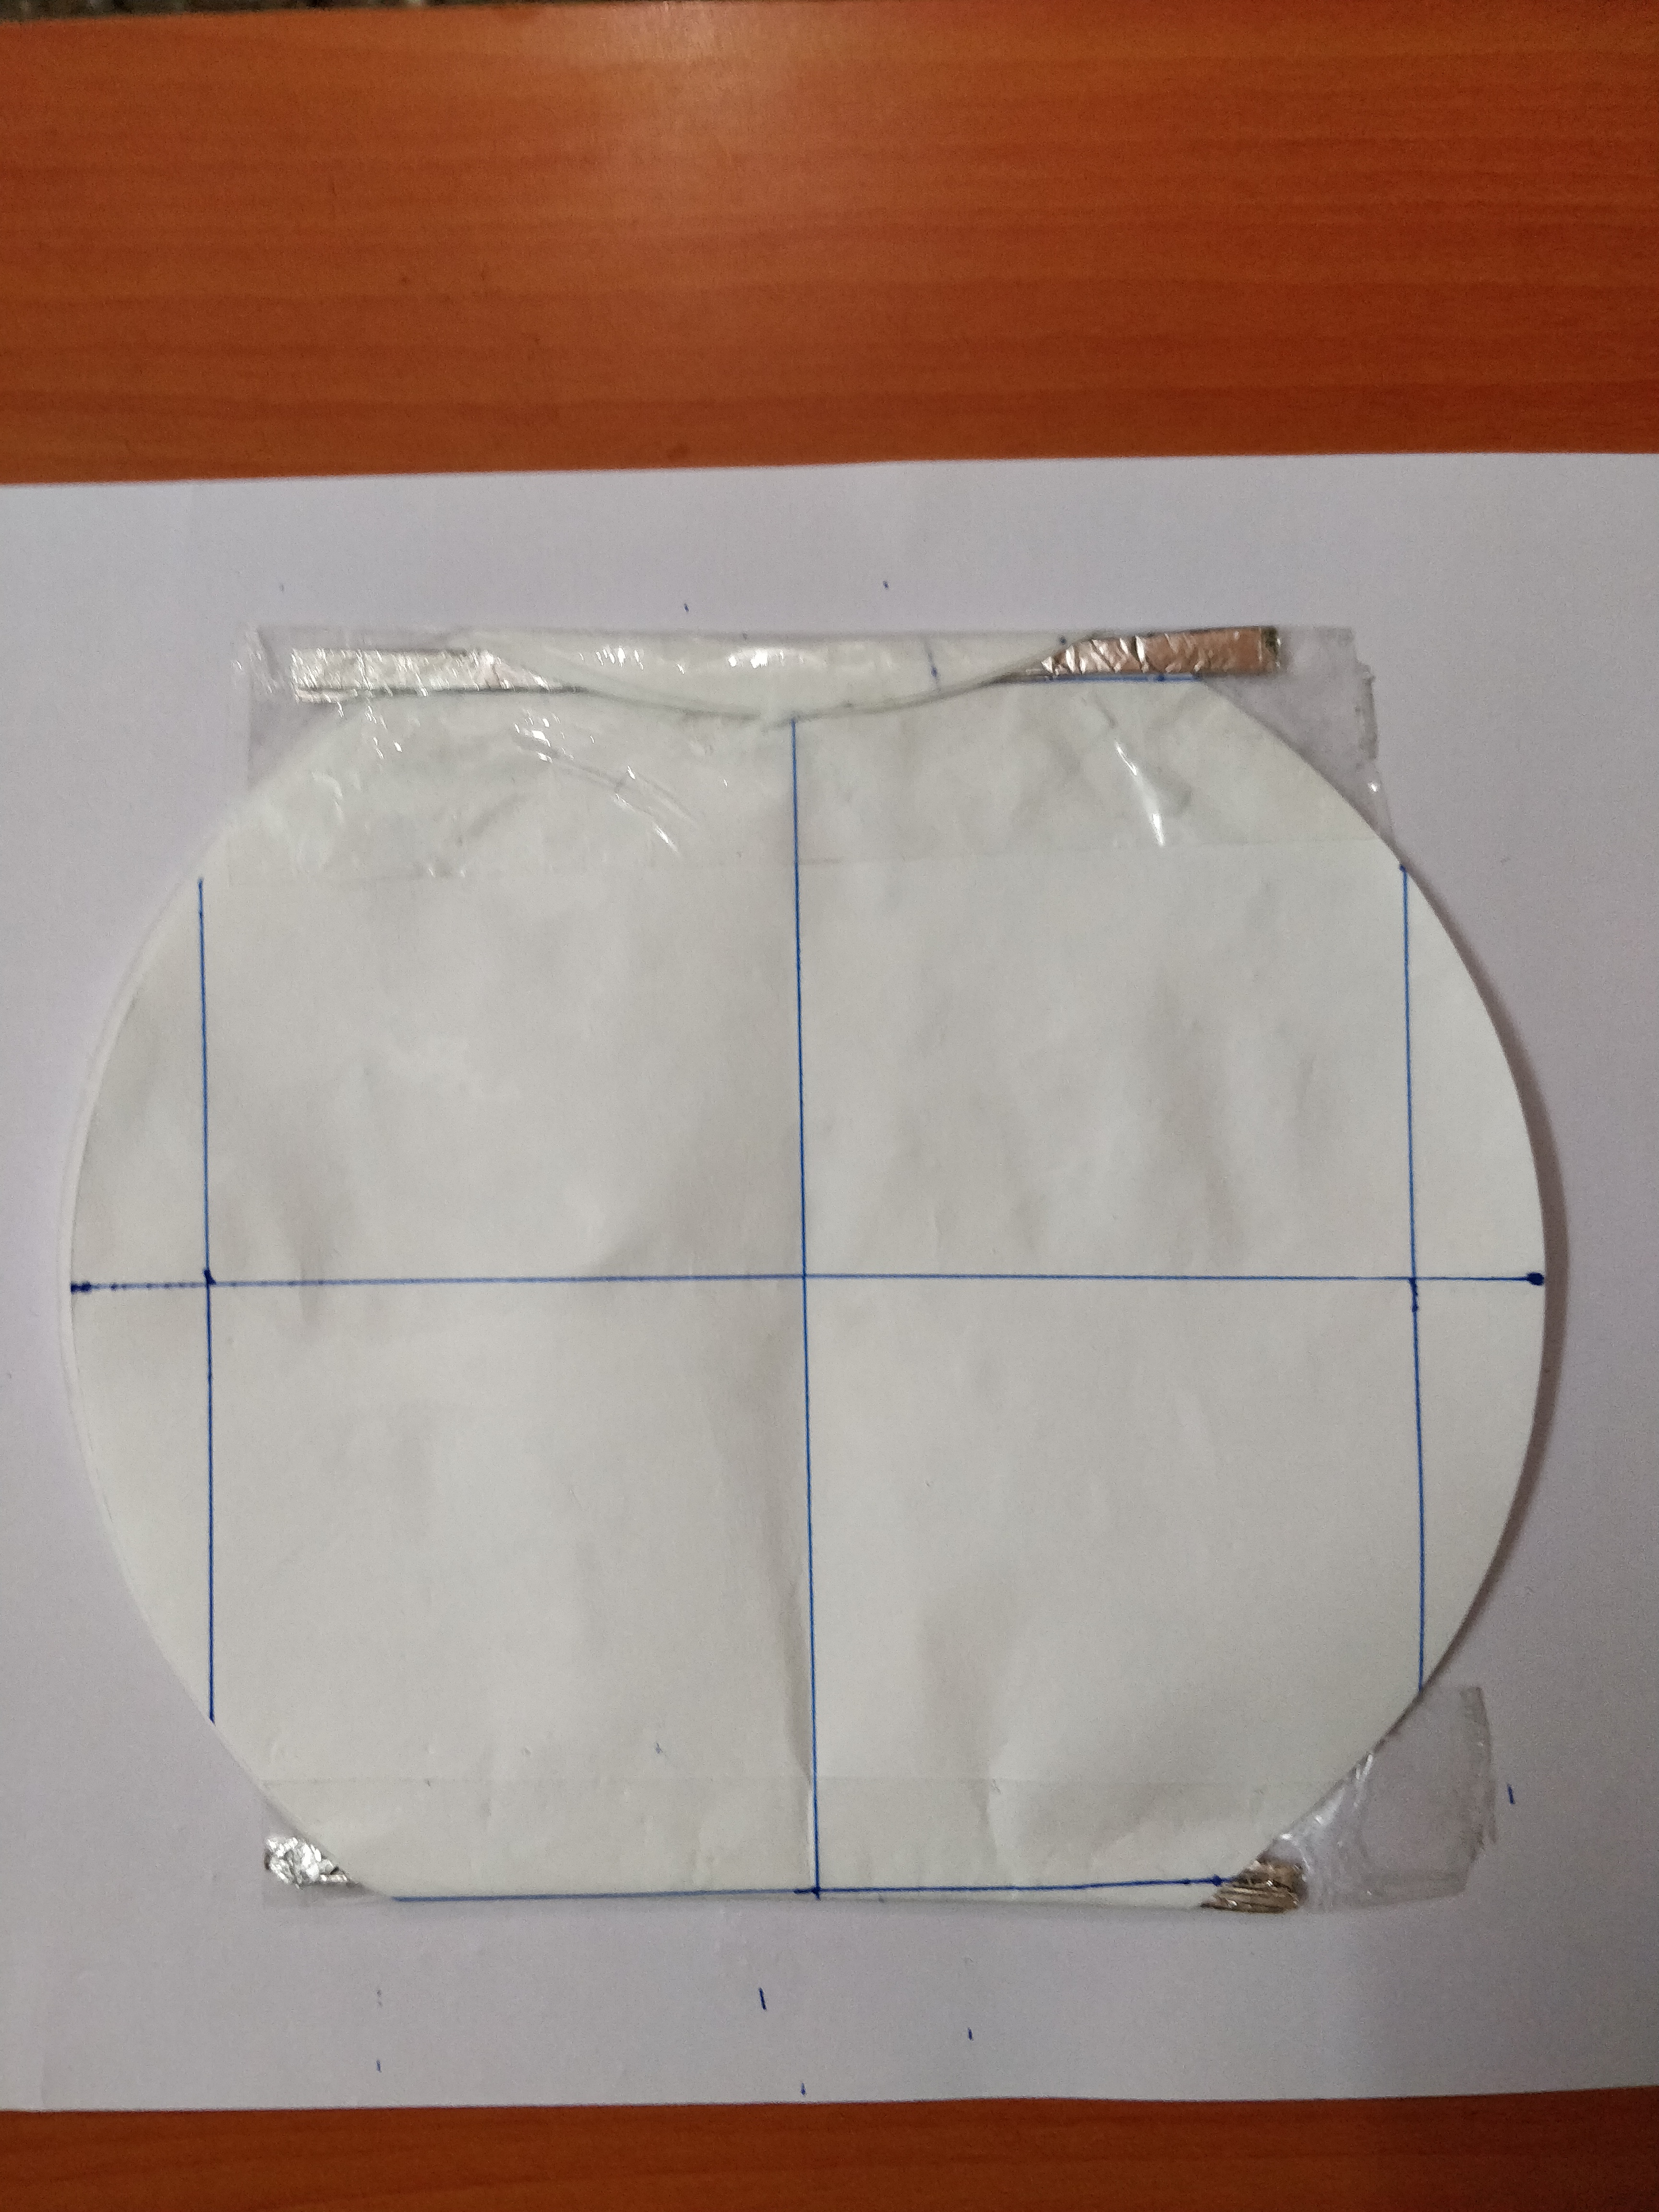 Aluminium Foil Pieces for Nose and Chin